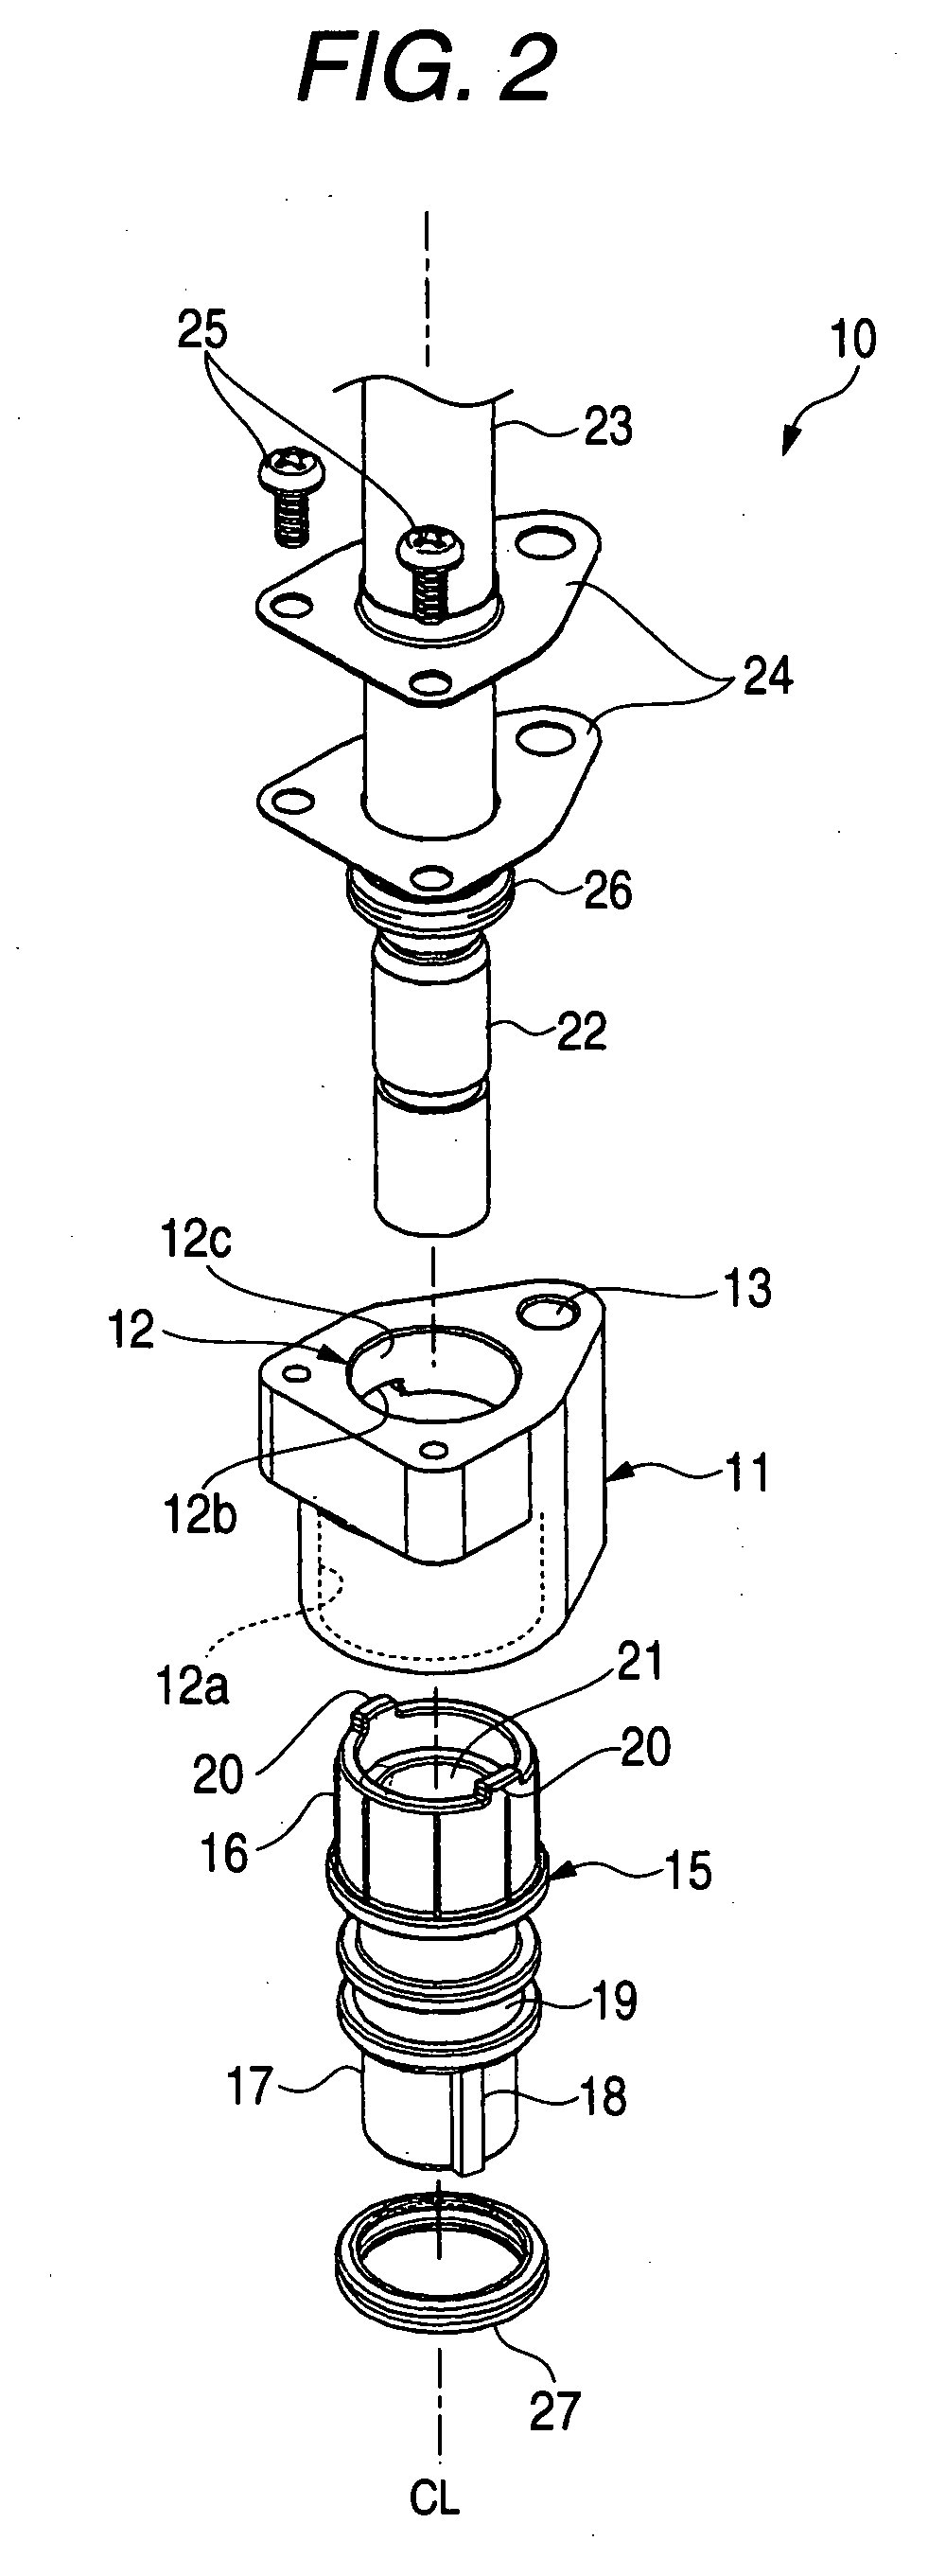 Female-male connector fitting structure